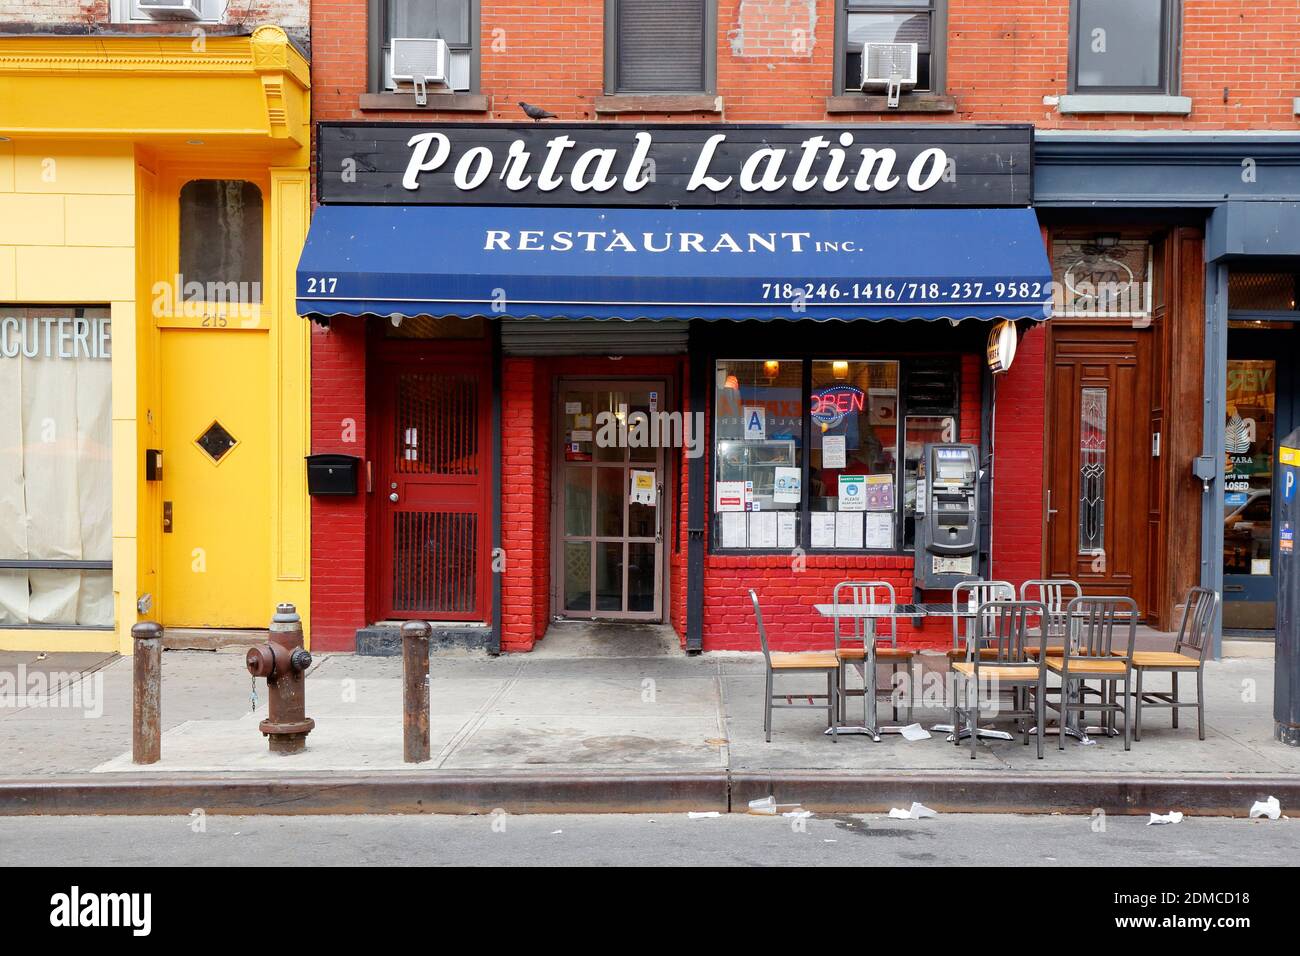 Portal Latino, 217 Smith St, Brooklyn, NY. exterior storefront of a Dominican restaurant in the Cobble Hill neighborhood. Stock Photo